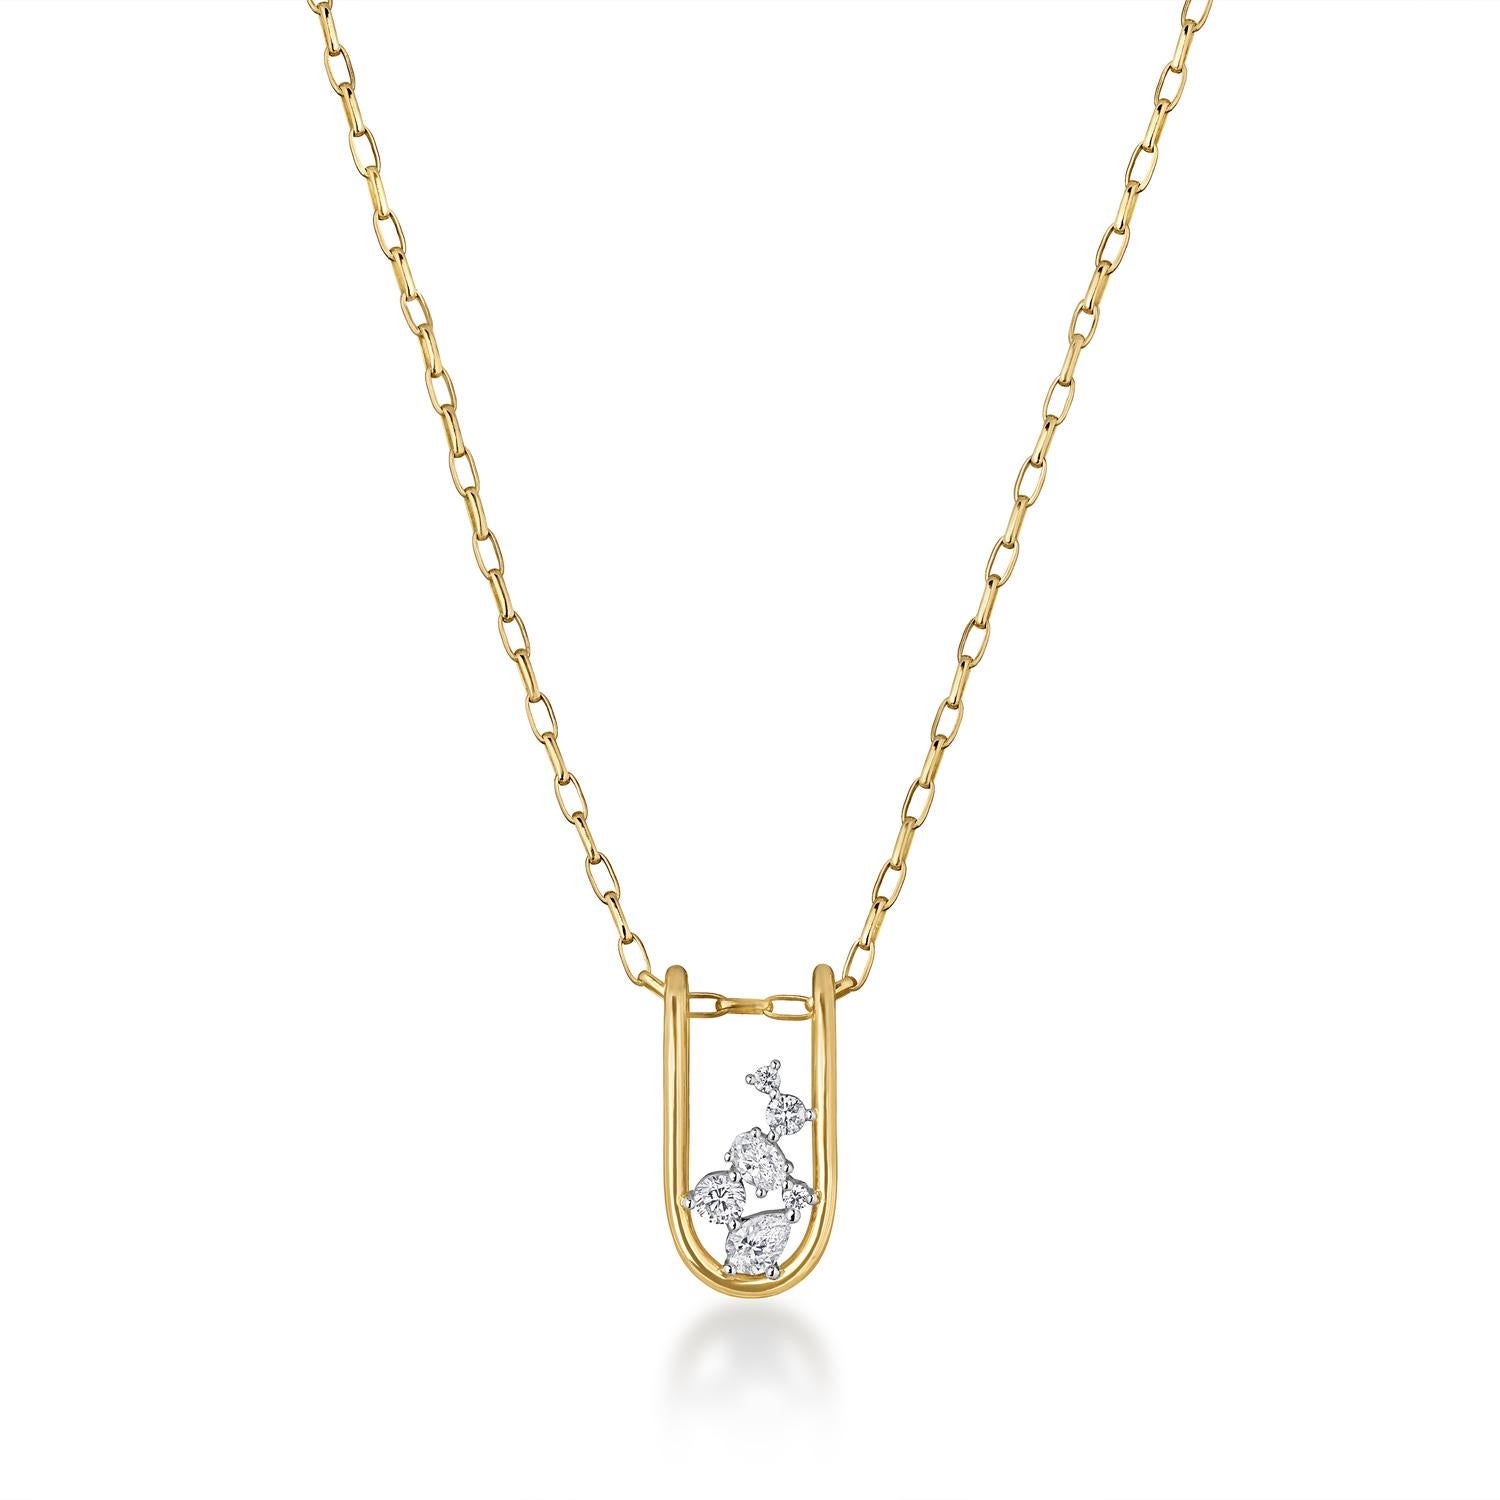 A 27mm small folded link pendant perfect to wear alone or layered. It is meticulously handcrafted with 18K solid gold with varying round, oval, and pear natural diamonds set in platinum. 

The Mara Collection was built around the beauty of negative